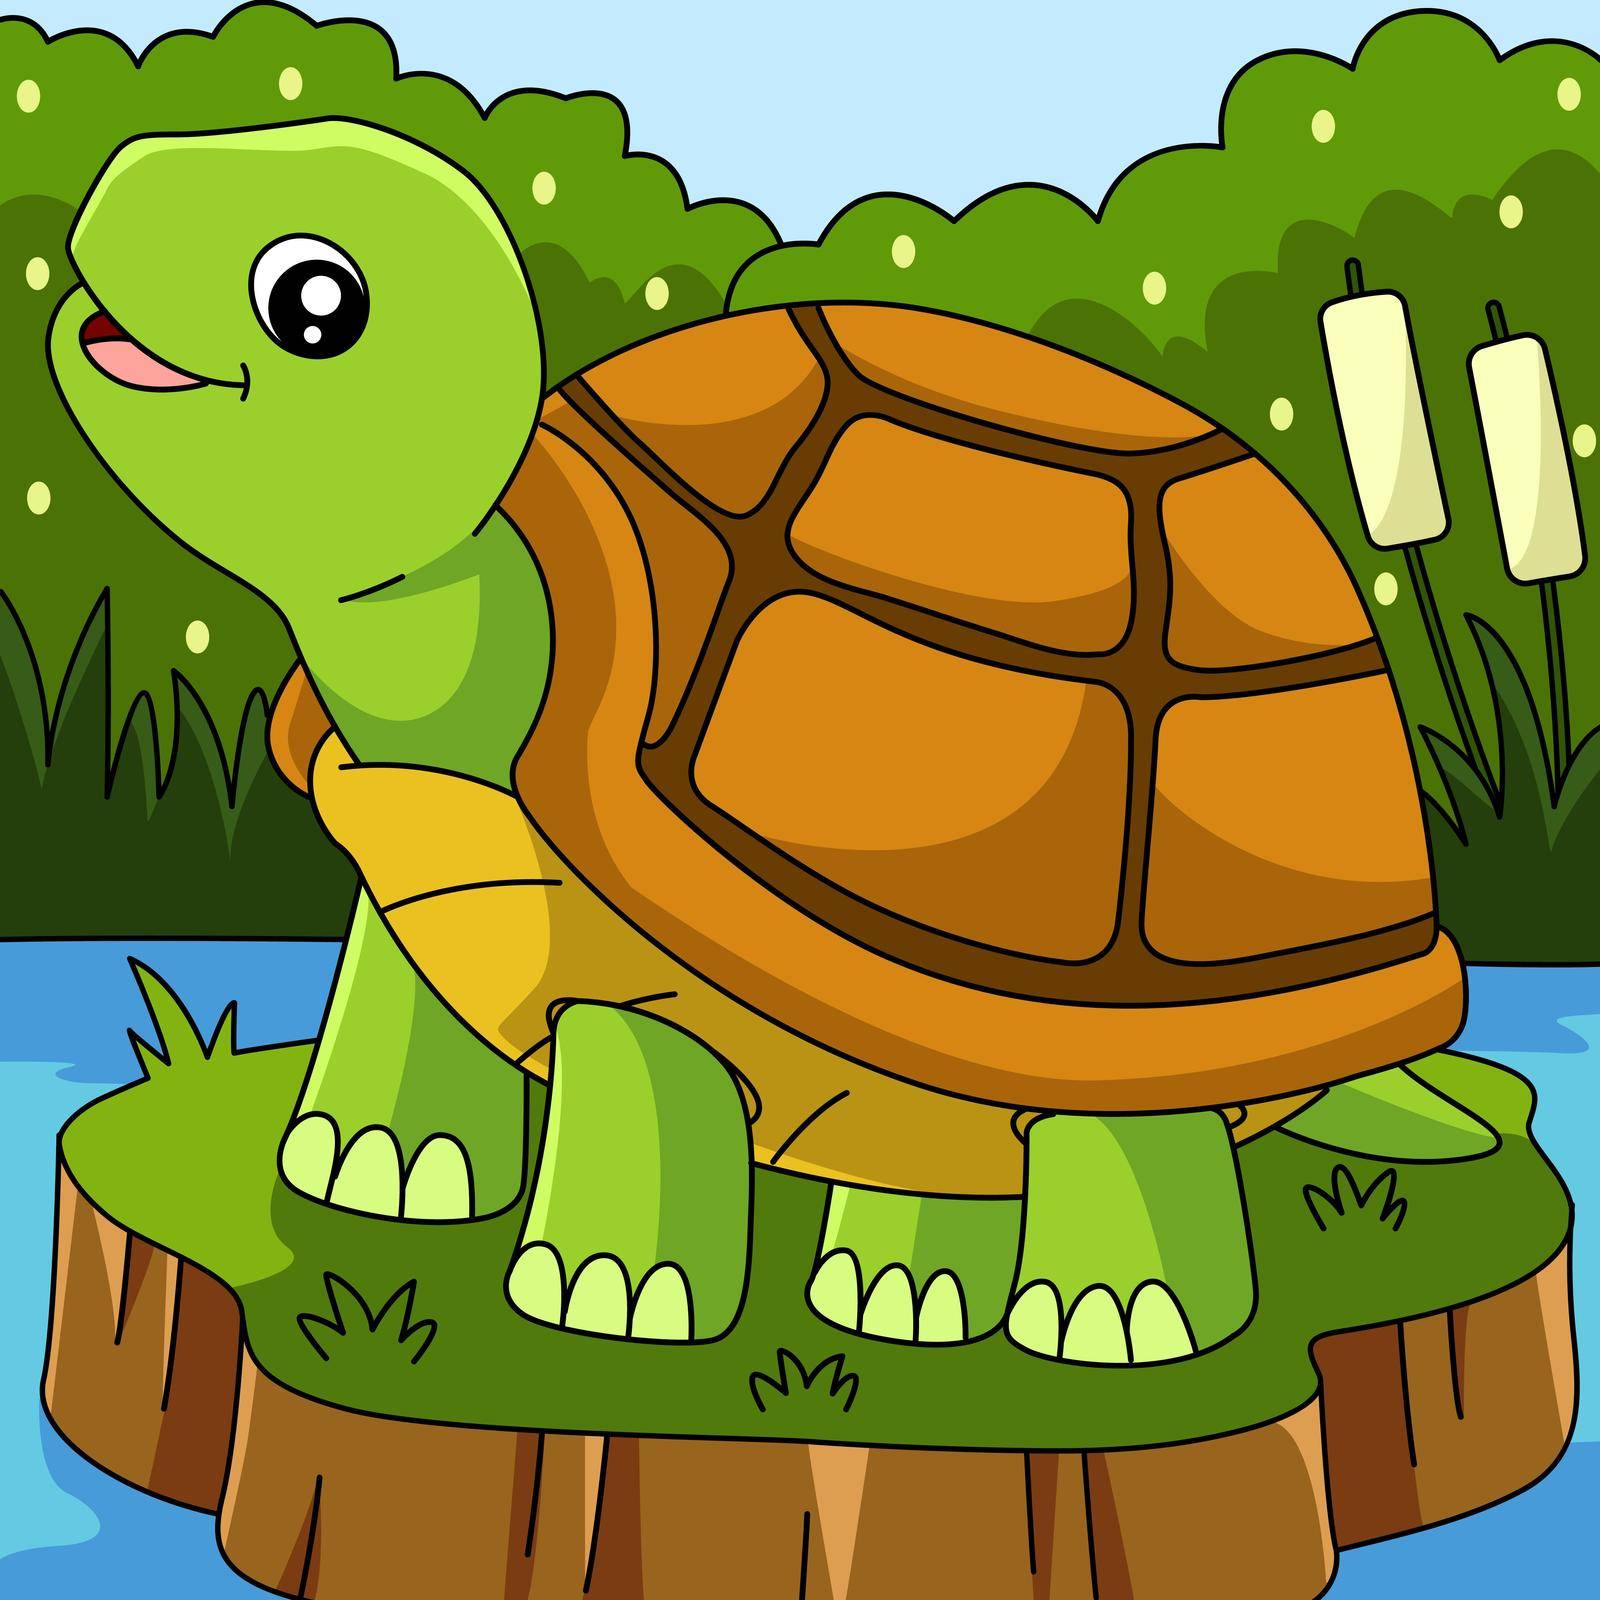 This cartoon illustration shows a turtle vector illustration.